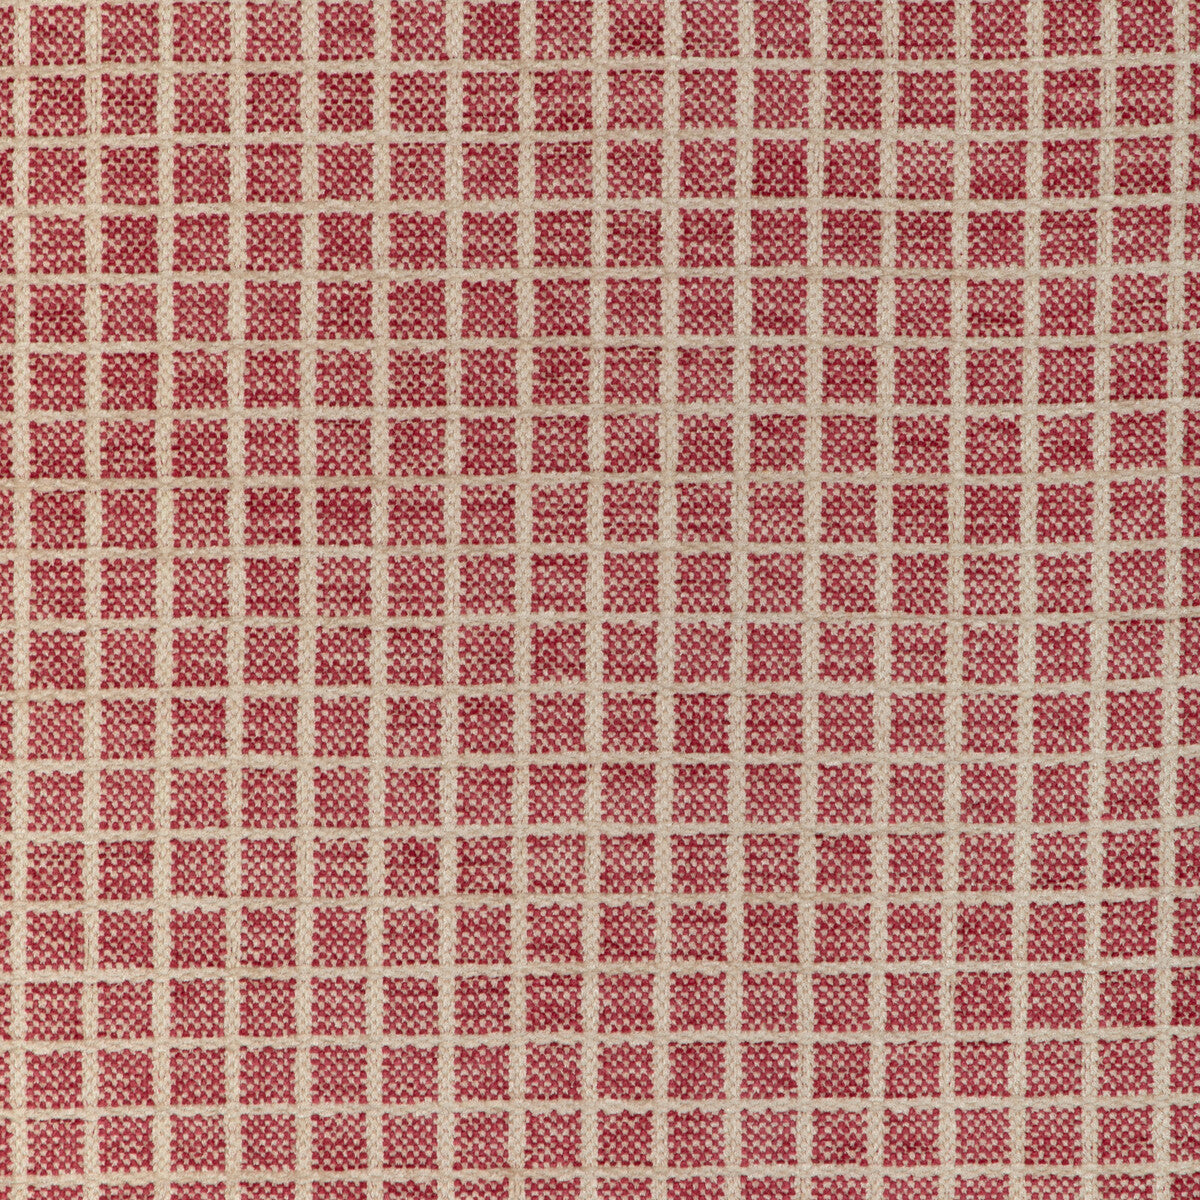 Chiron Texture fabric in berry color - pattern 8023155.97.0 - by Brunschwig &amp; Fils in the Chambery Textures IV collection